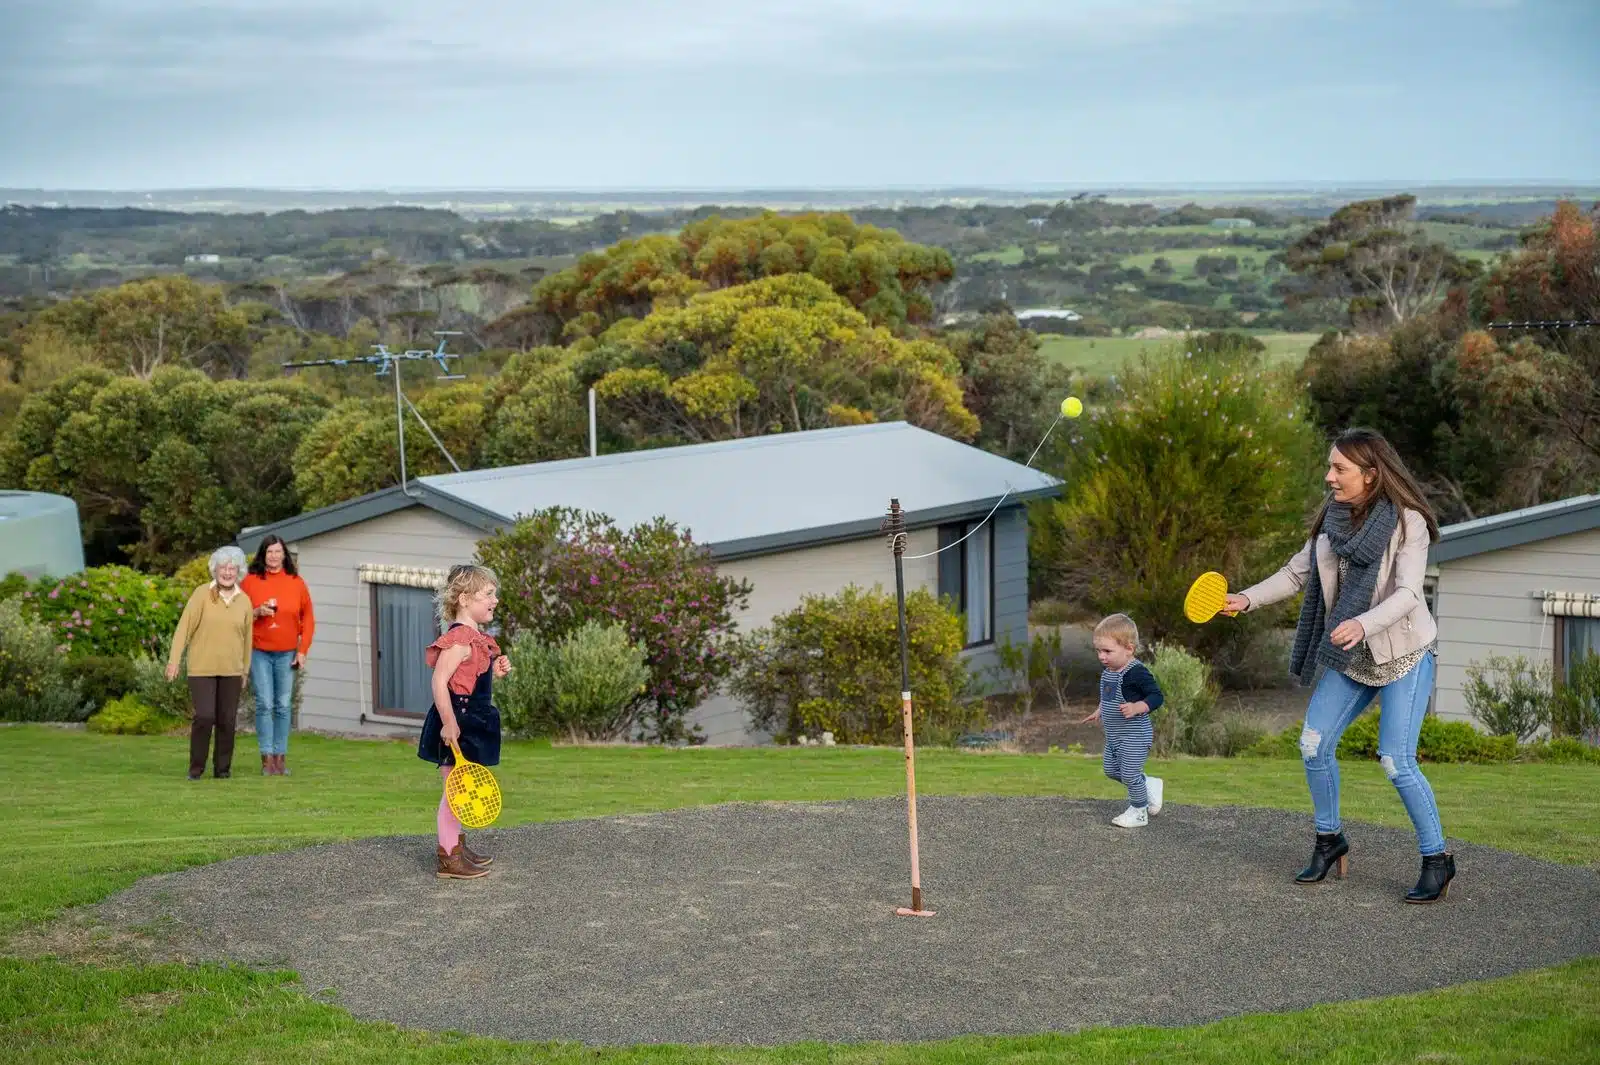 What’s the ideal accommodation for an extended family holiday on Kangaroo island?